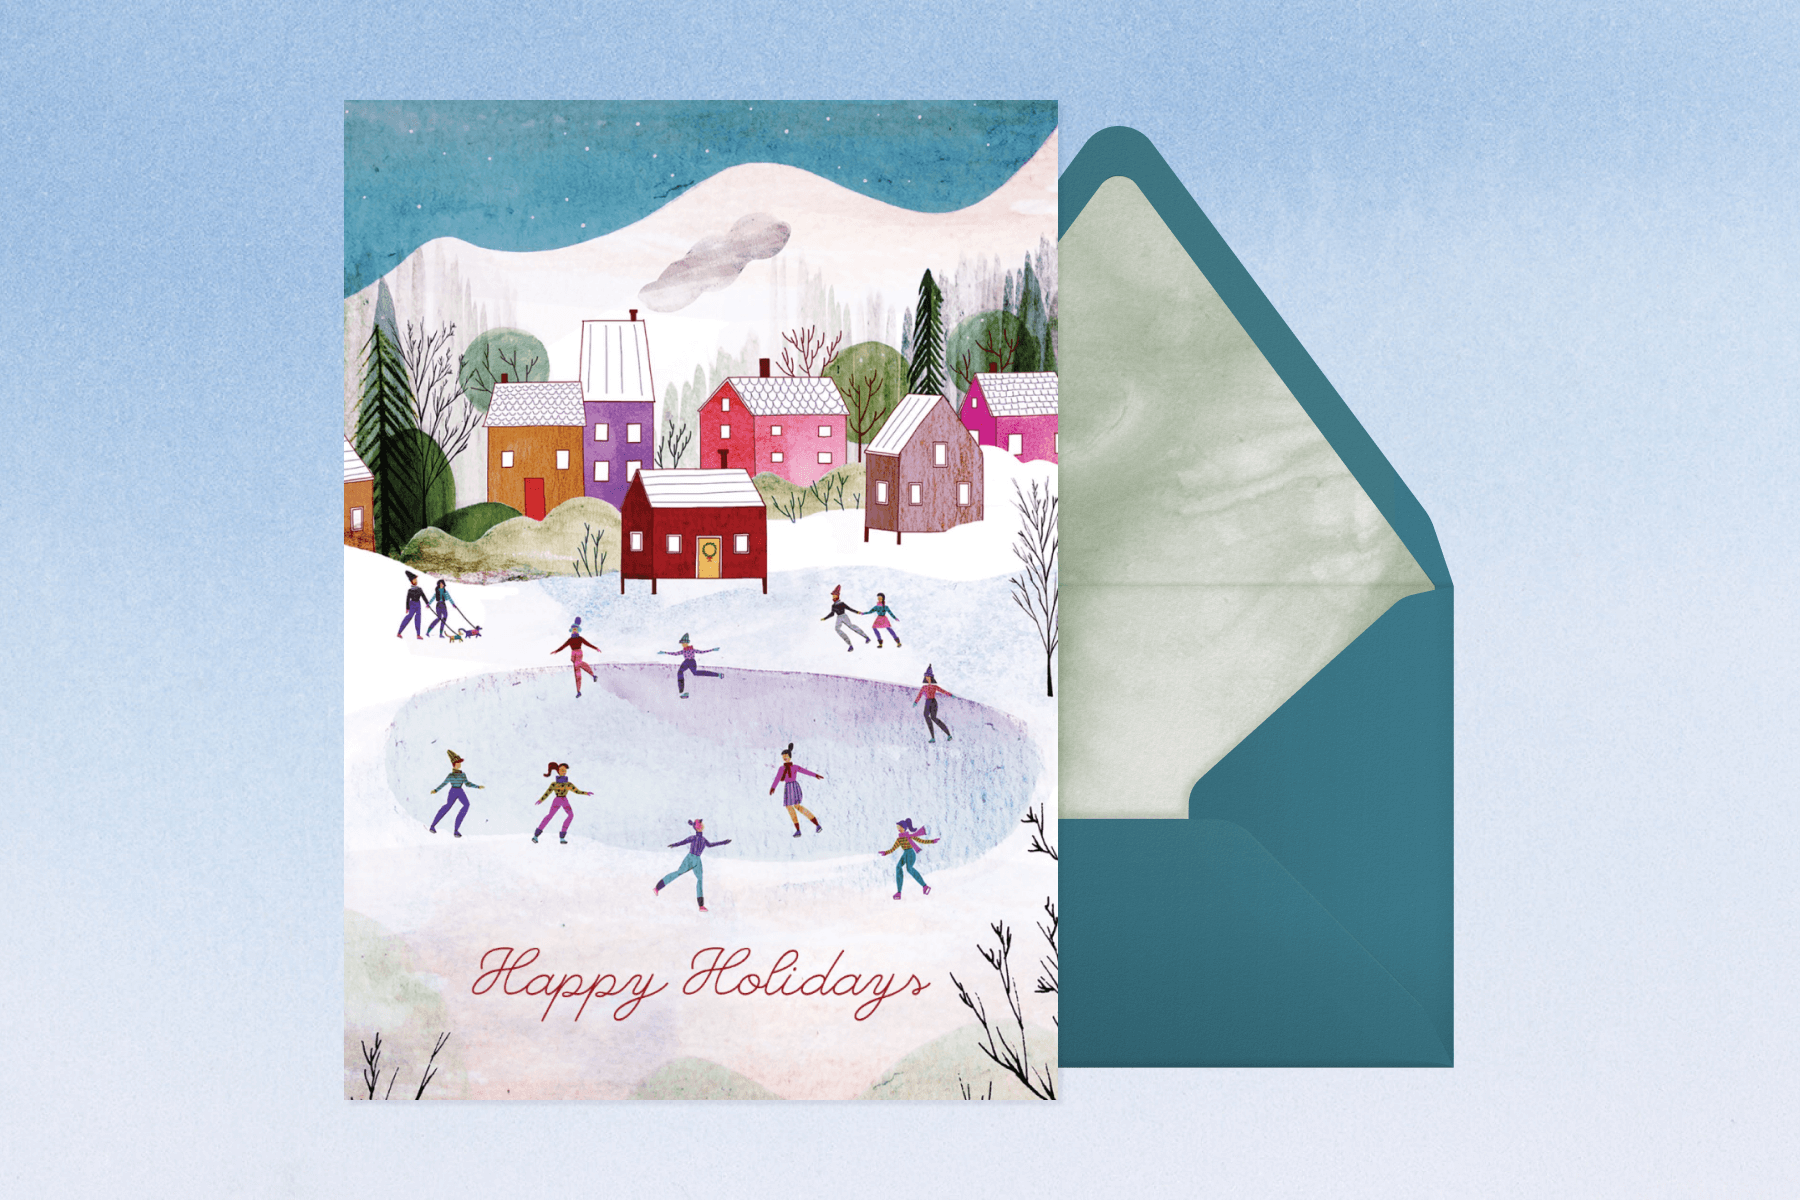 A card shows a winter scene with people ice skating in front of colorful houses.